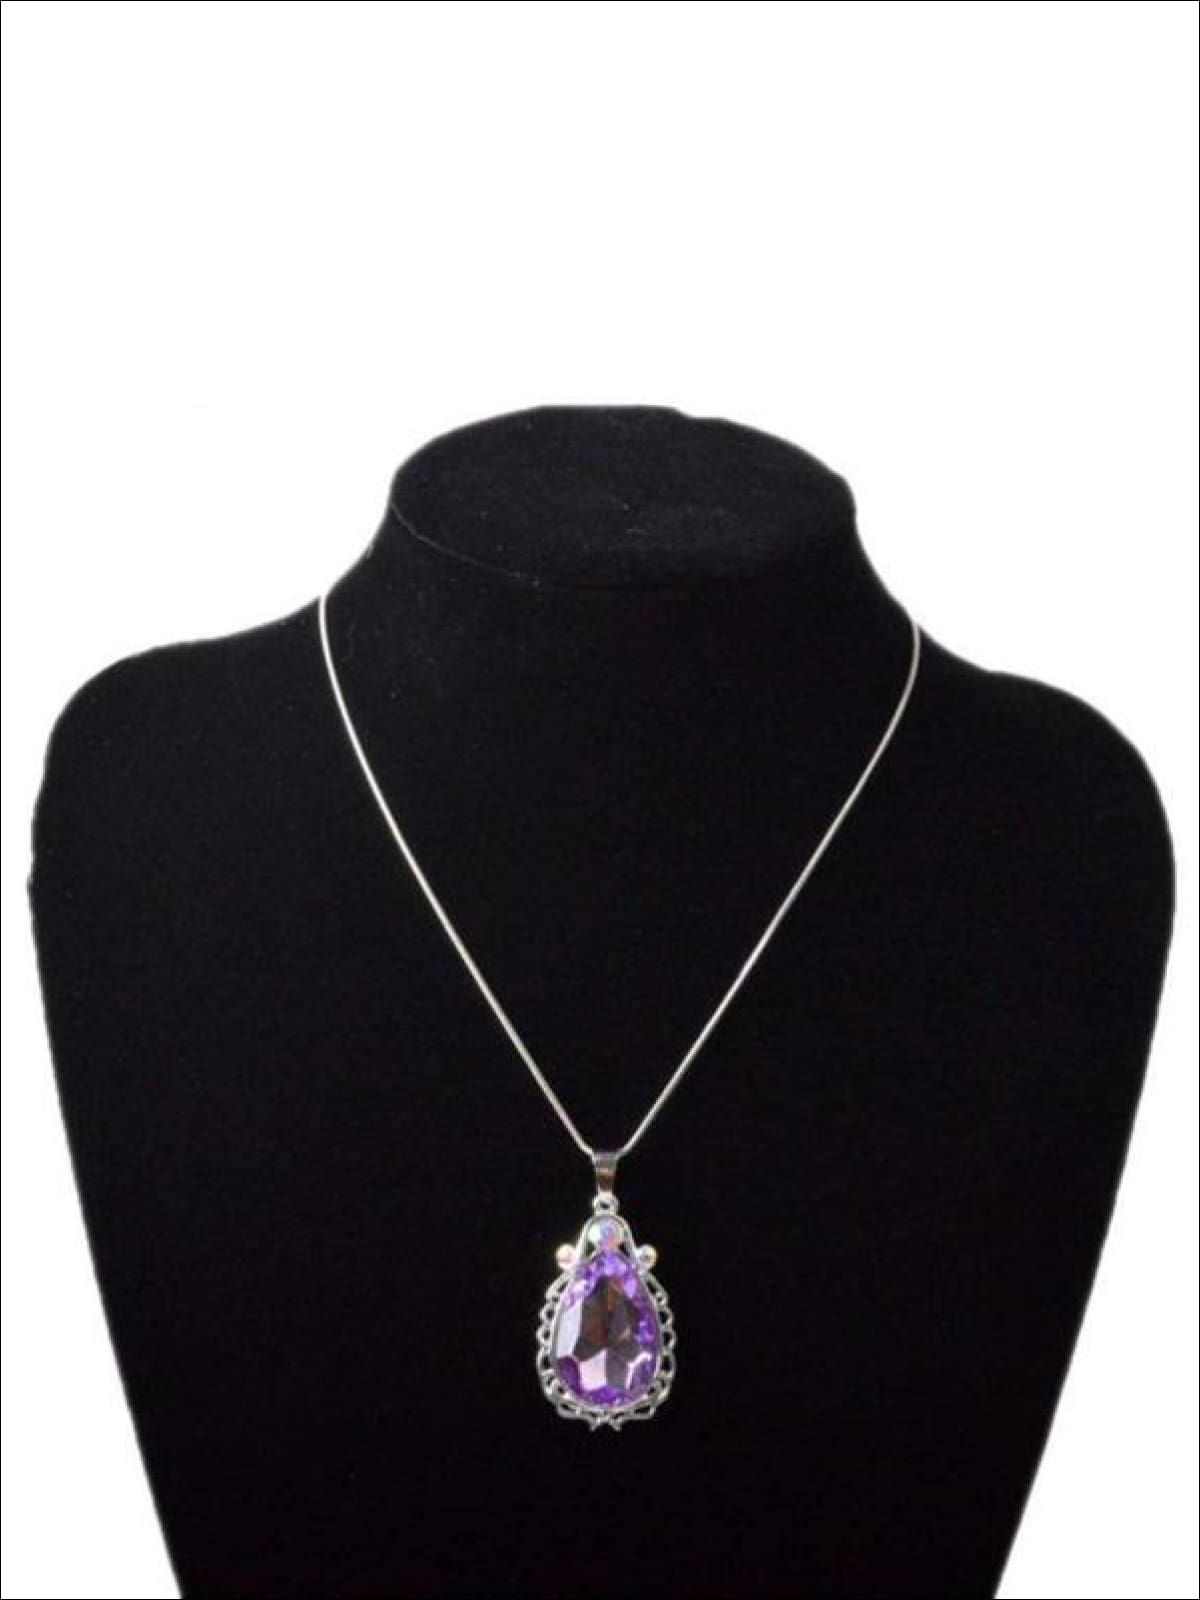 Girls Princess Sofia The First Inspired Crystal Teardrop Pendant Necklace - One Size - Girls Necklace